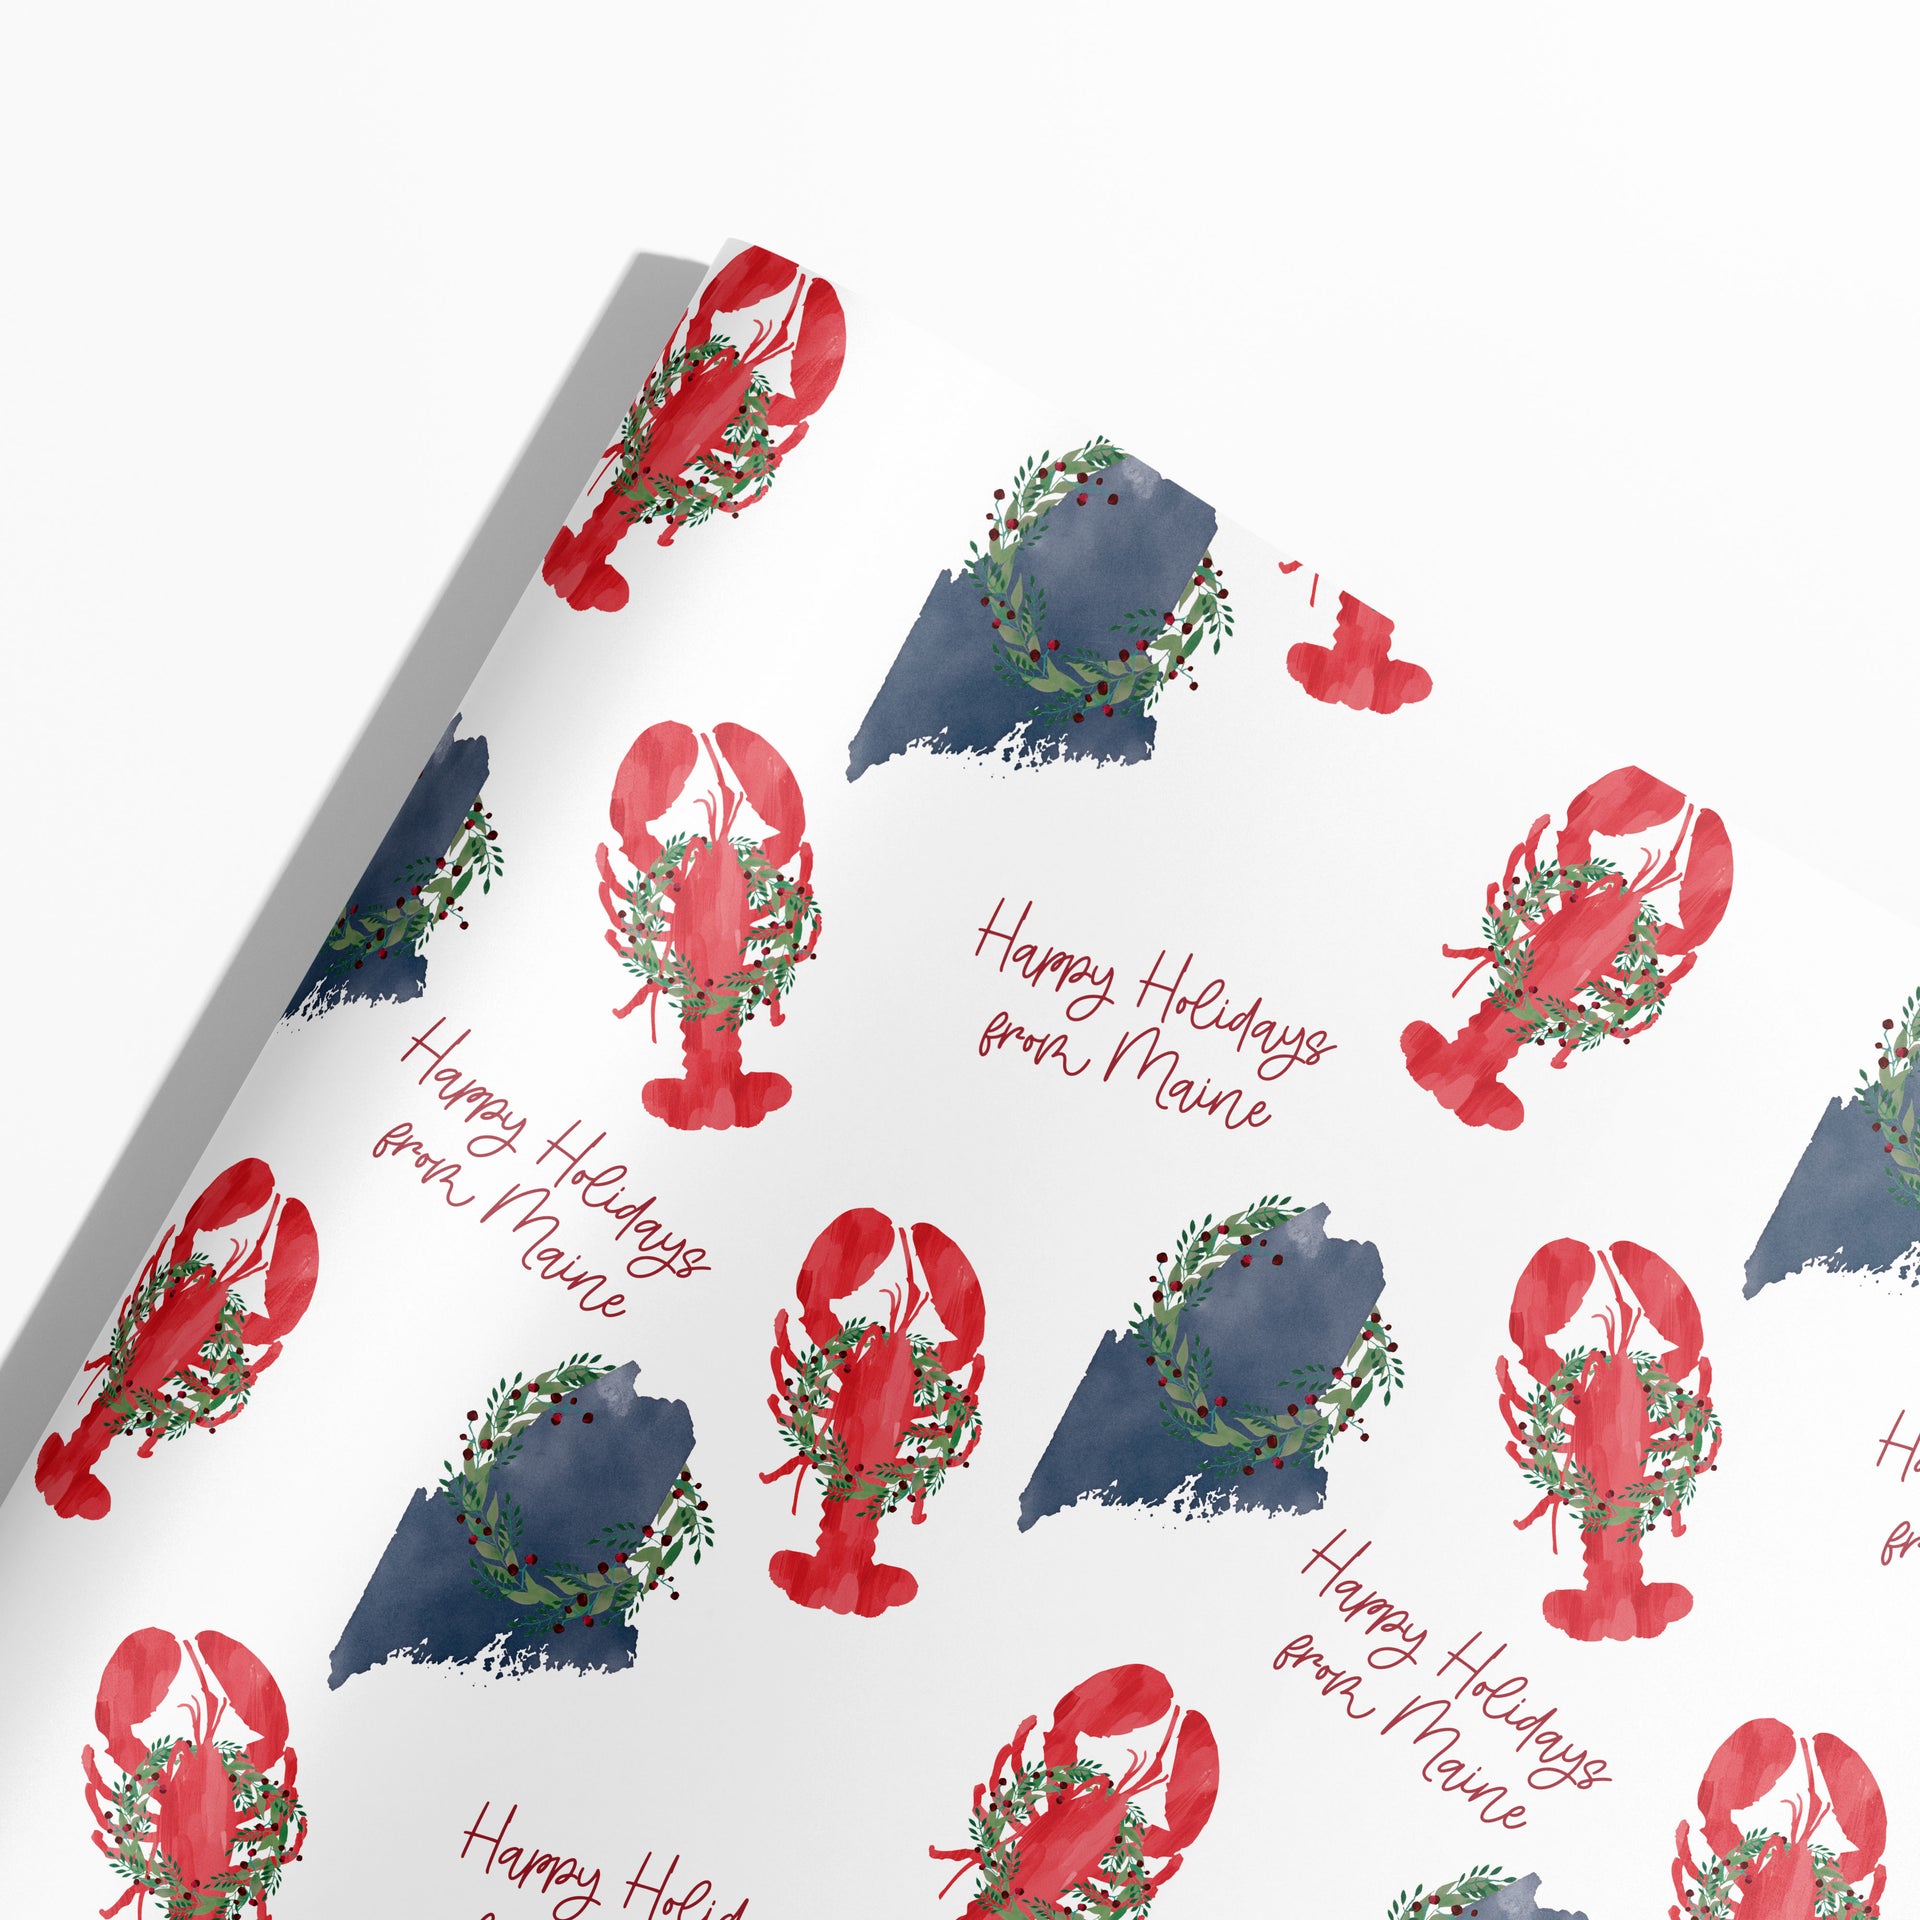 Maine Holiday Lobster Gift Wrap by Gert & Co